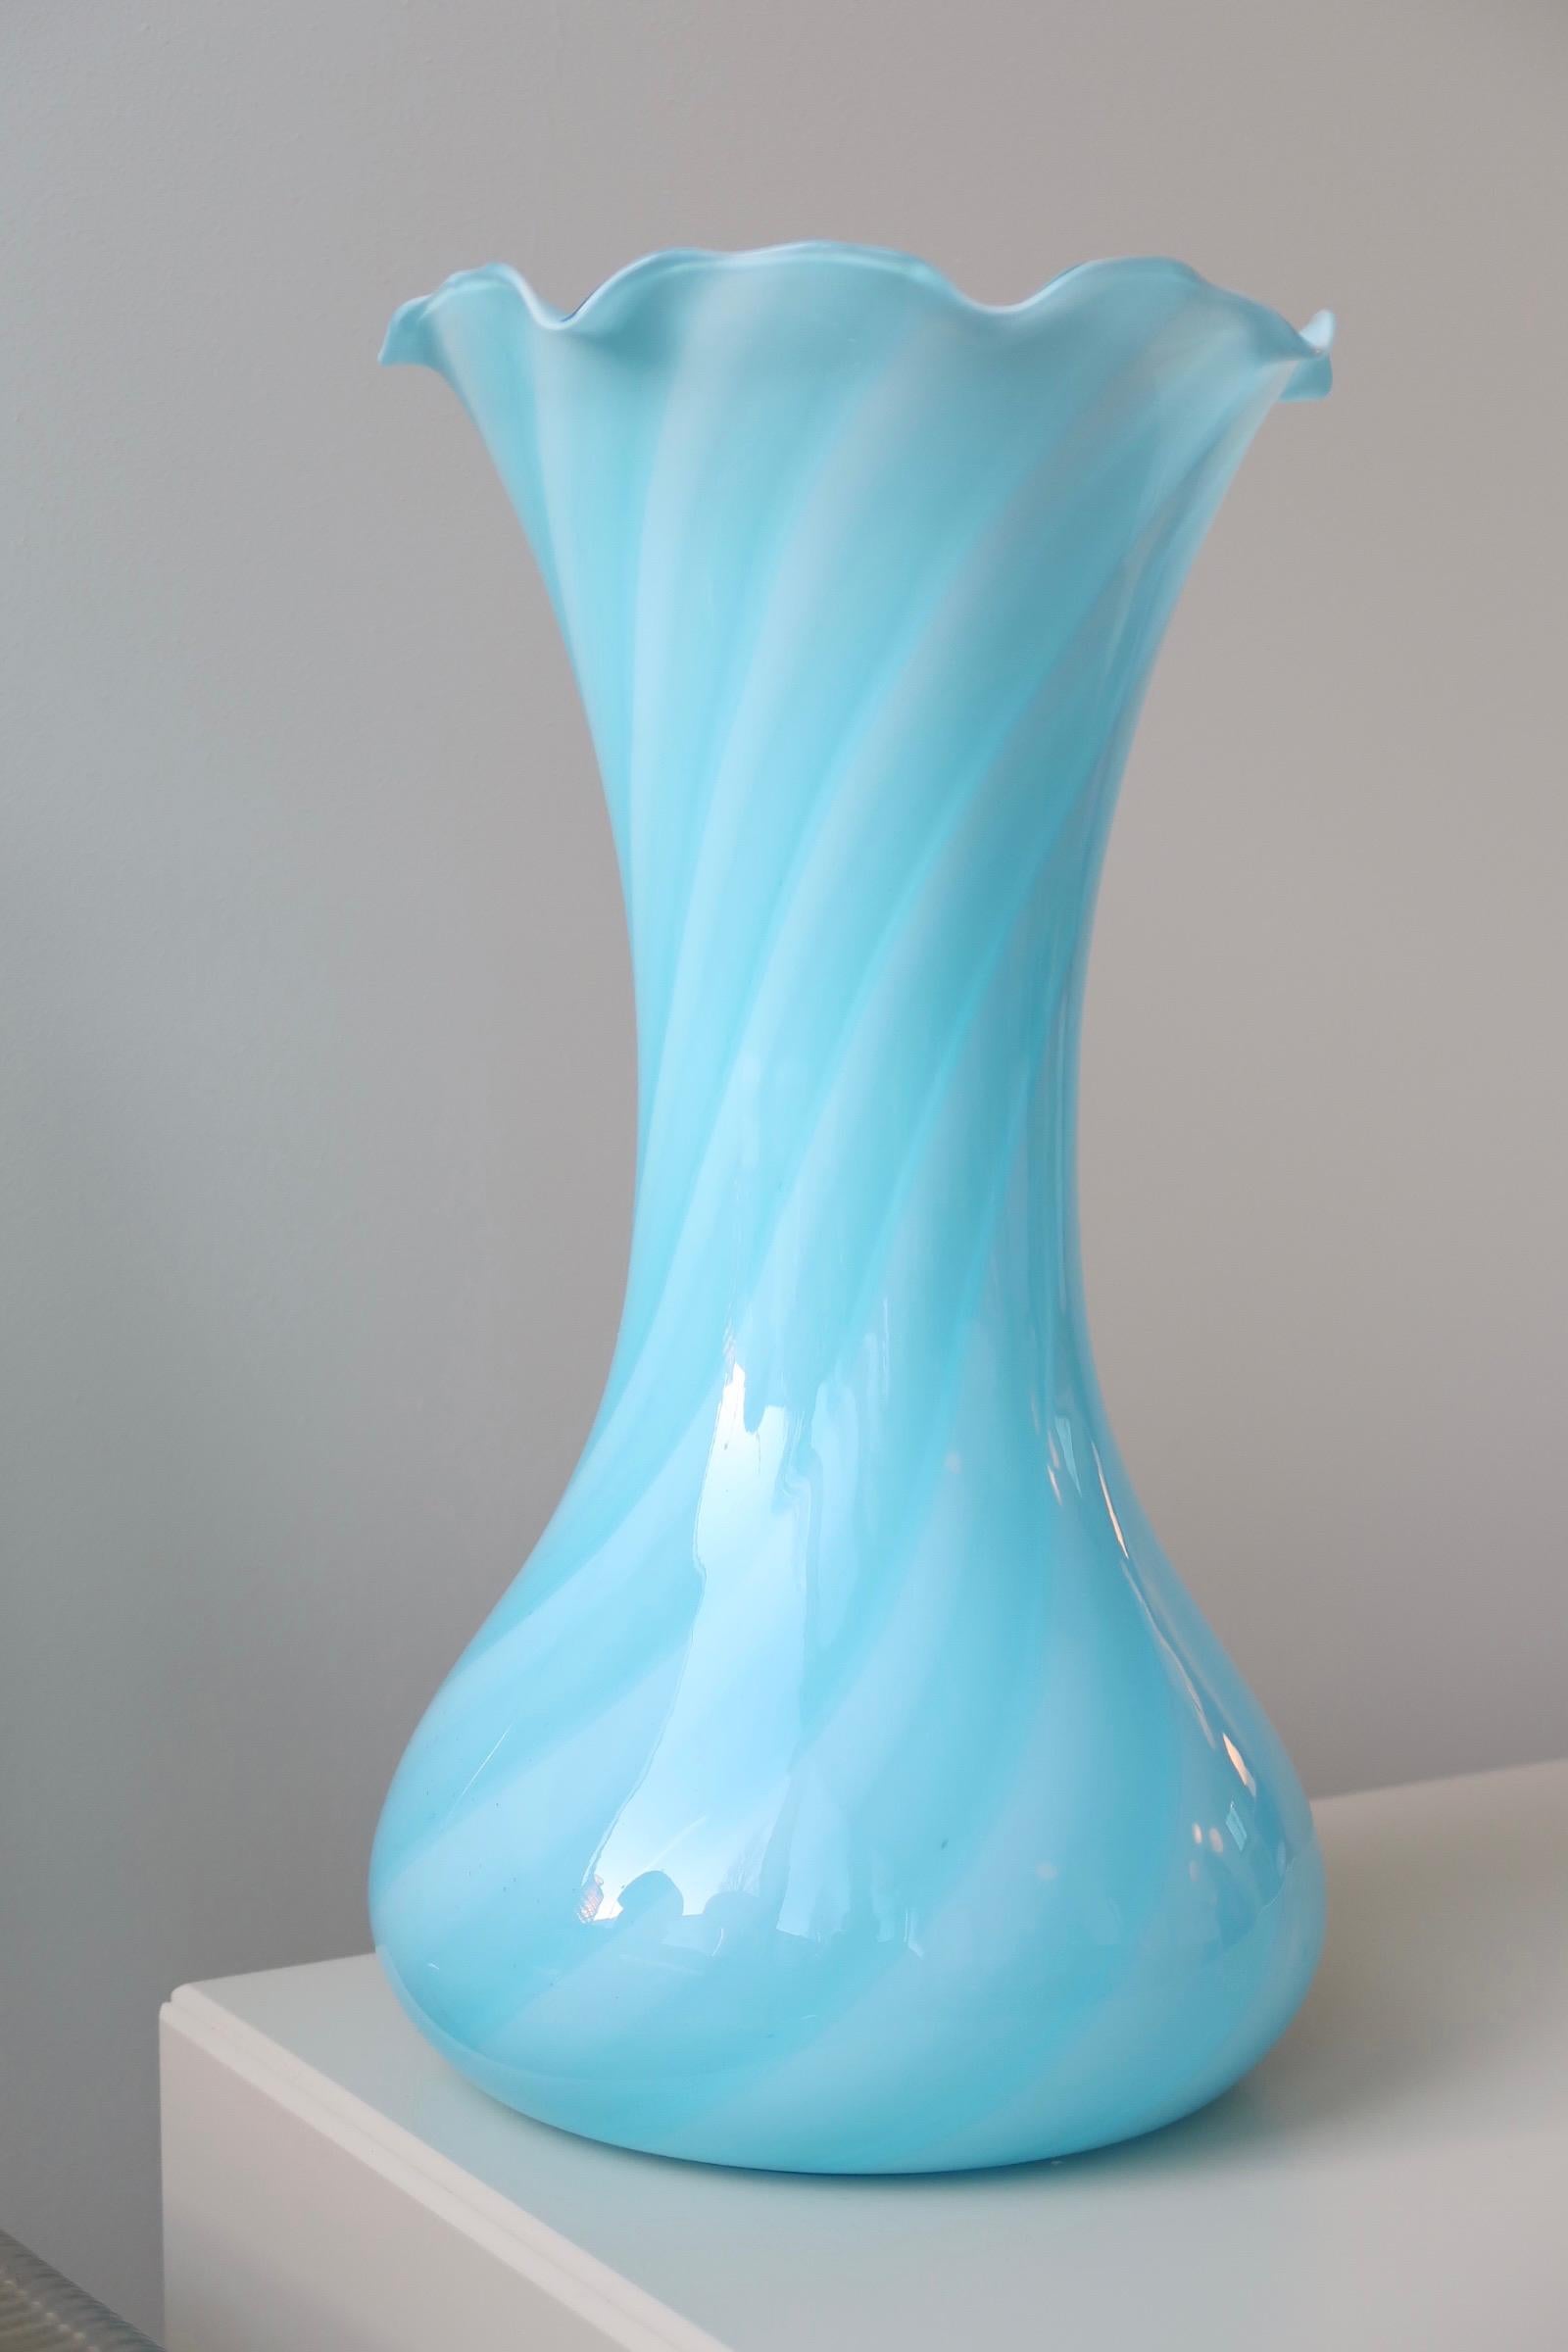 Extra large vintage Murano glass vase in a perfect light blue tone. Mouth-blown in blue glass with a swirl pattern and a beautifully finished edge. The vase is vintage and has a few signs of use, see pictures. Handmade in Italy, 1970s. H: 38 cm D: